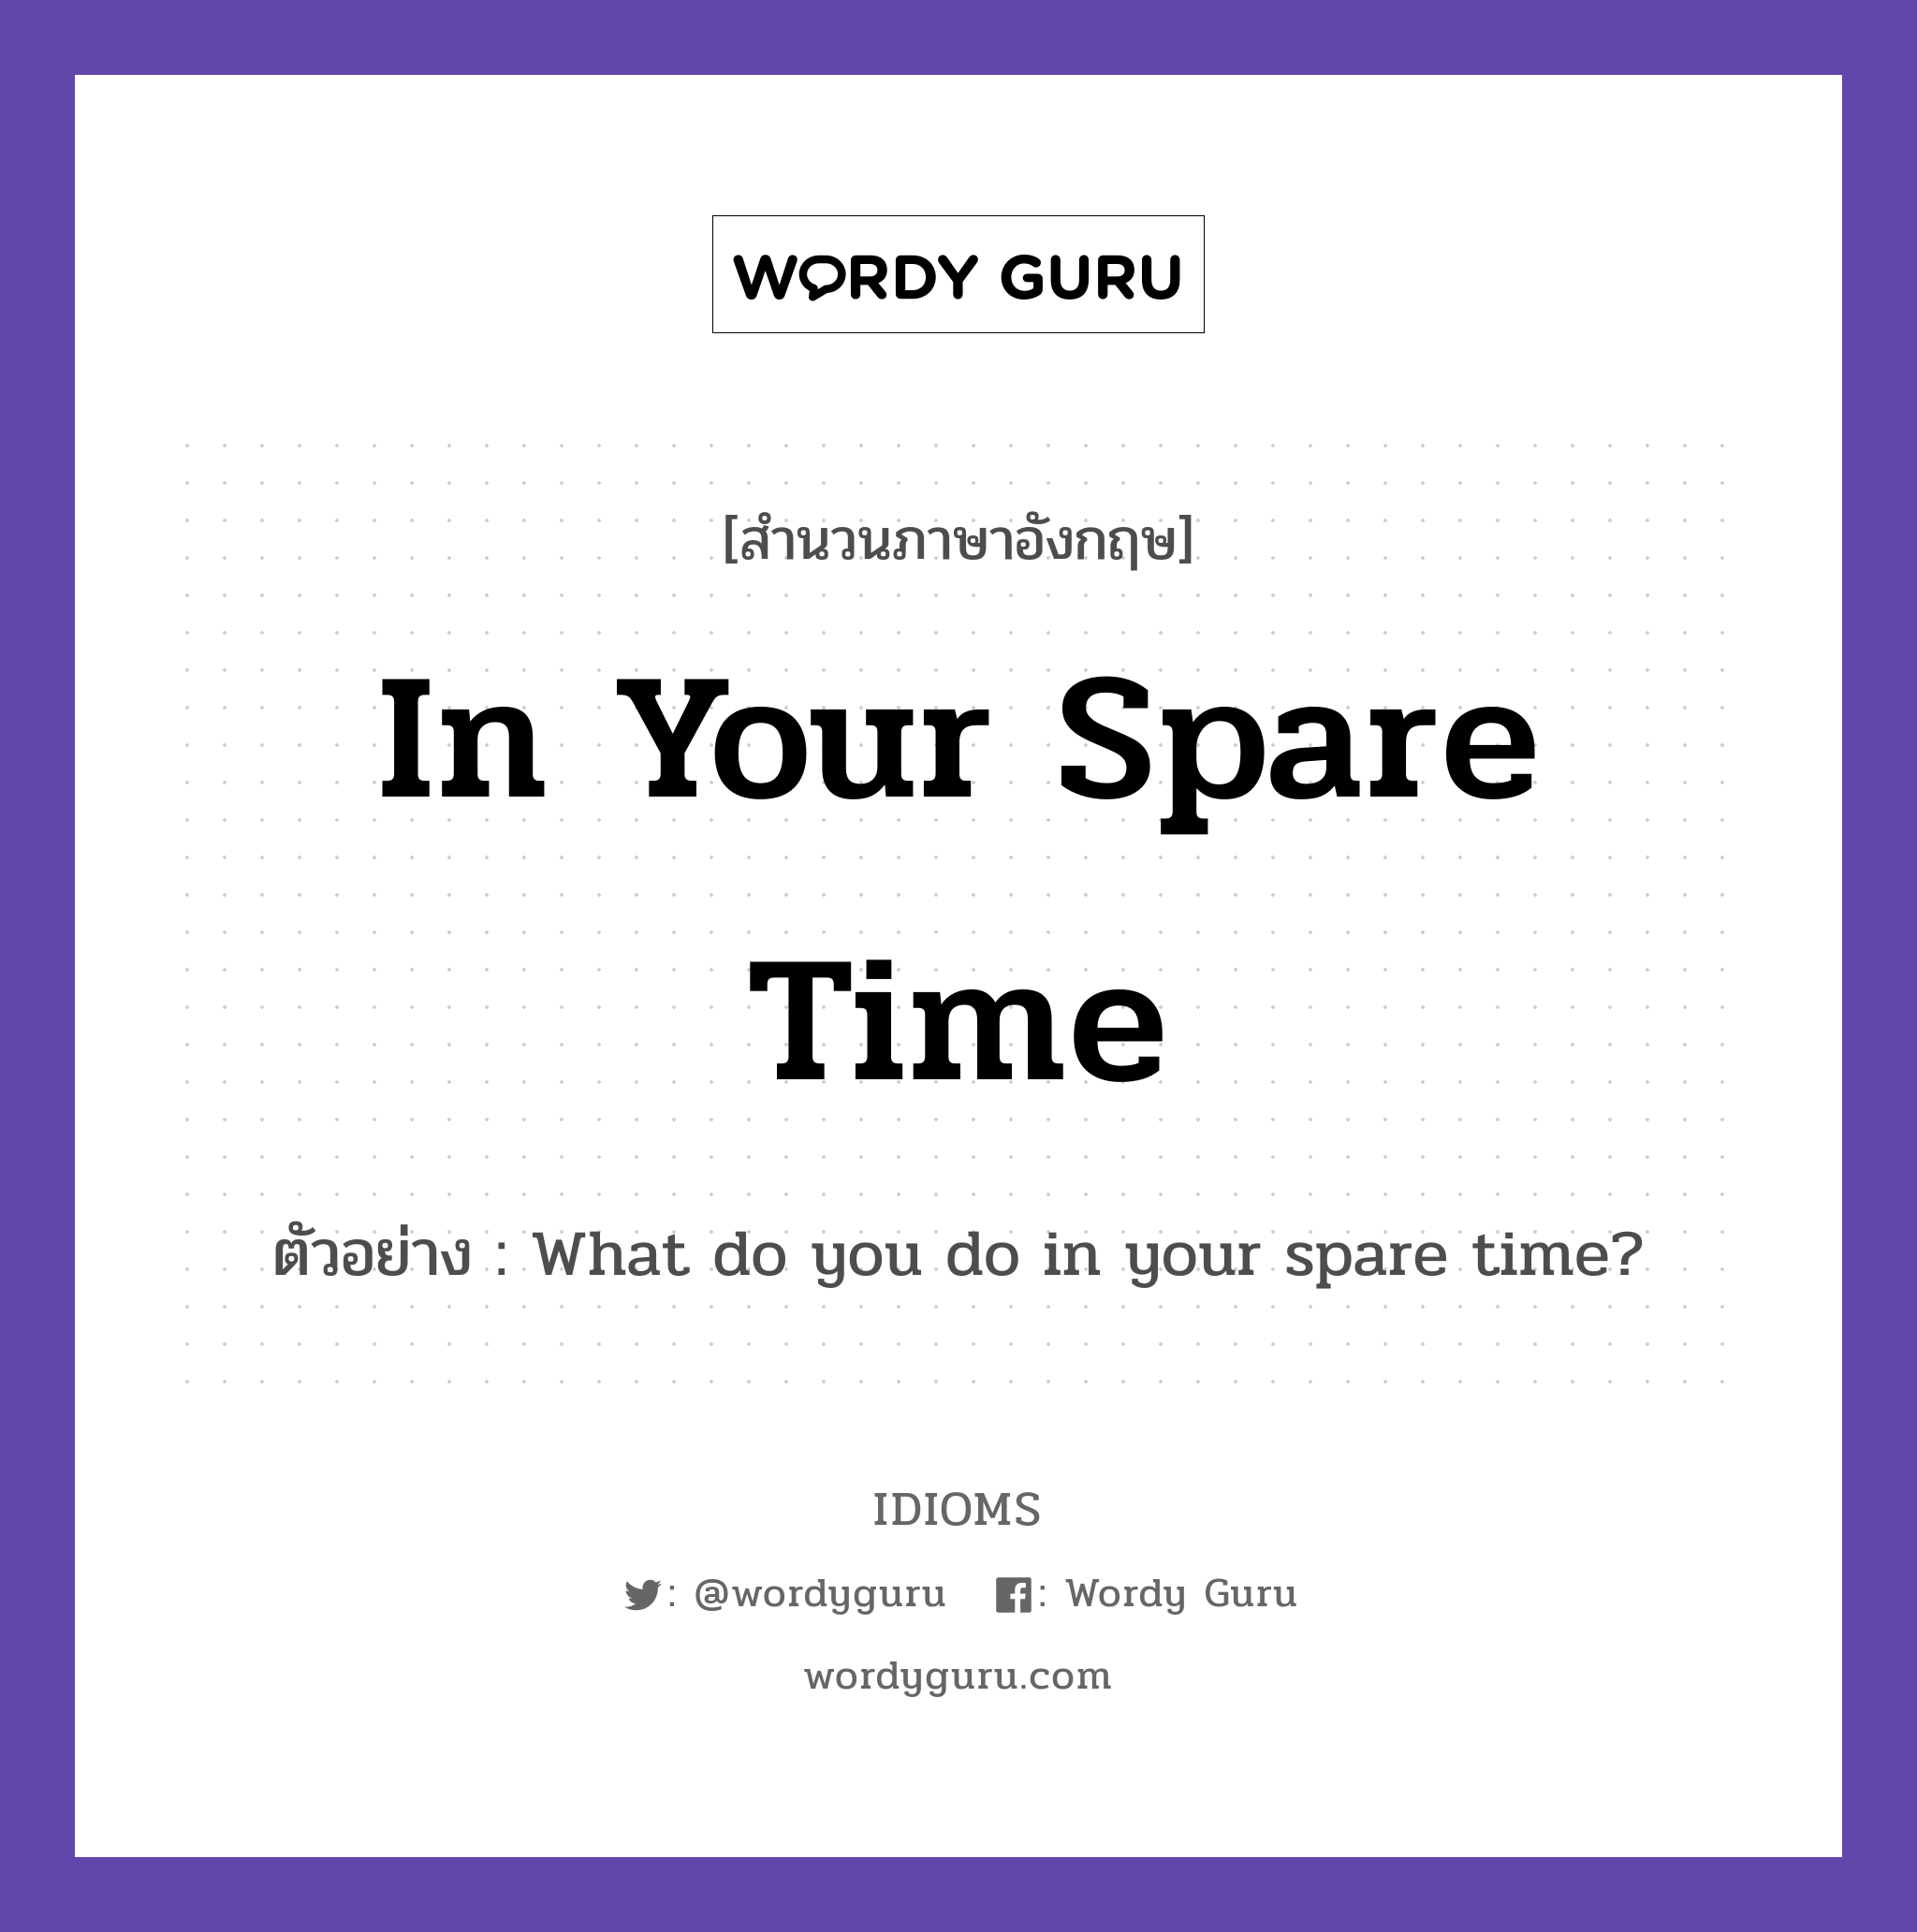 In Your Spare Time แปลว่า?, สำนวนภาษาอังกฤษ In Your Spare Time ตัวอย่าง What do you do in your spare time?